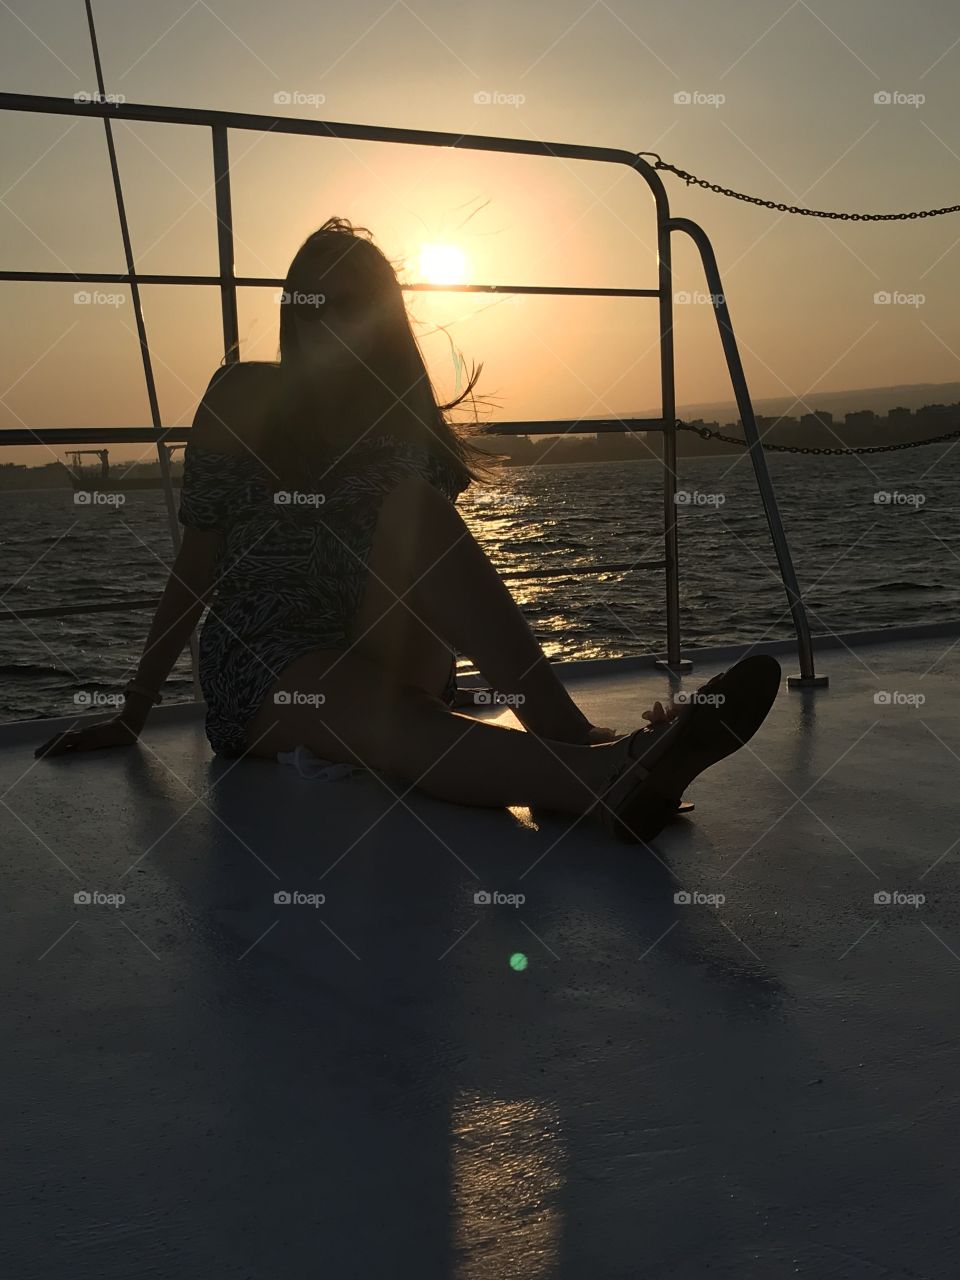 Sunset cruise in Limassol... follow me and I will follow you back 